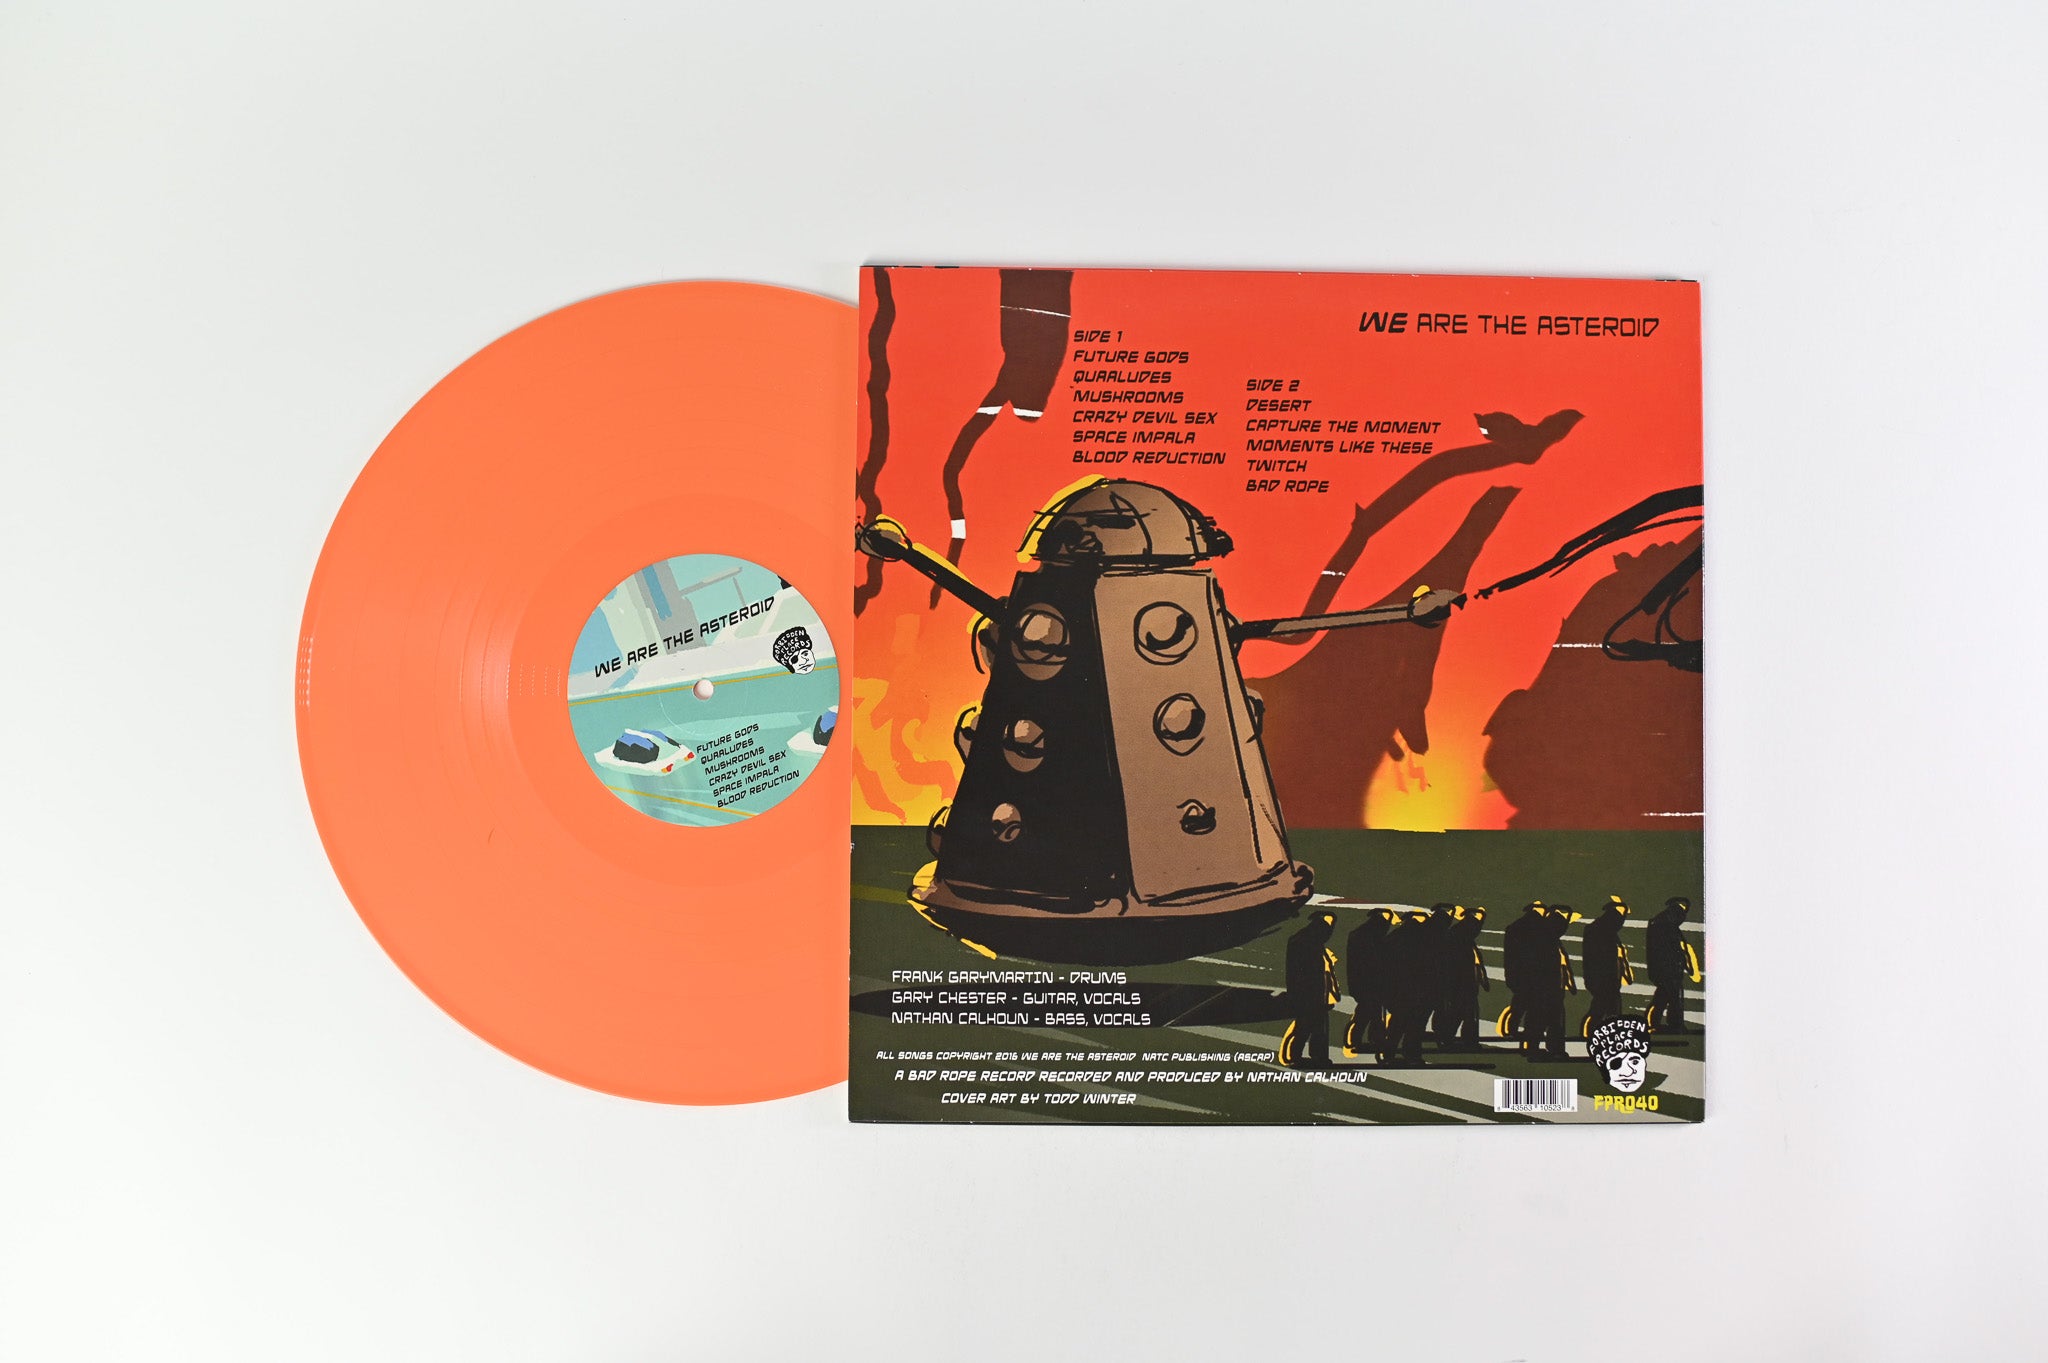 WE Are The Asteroid - WE Are The Asteroid on Forbidden Place Records - Orange Vinyl